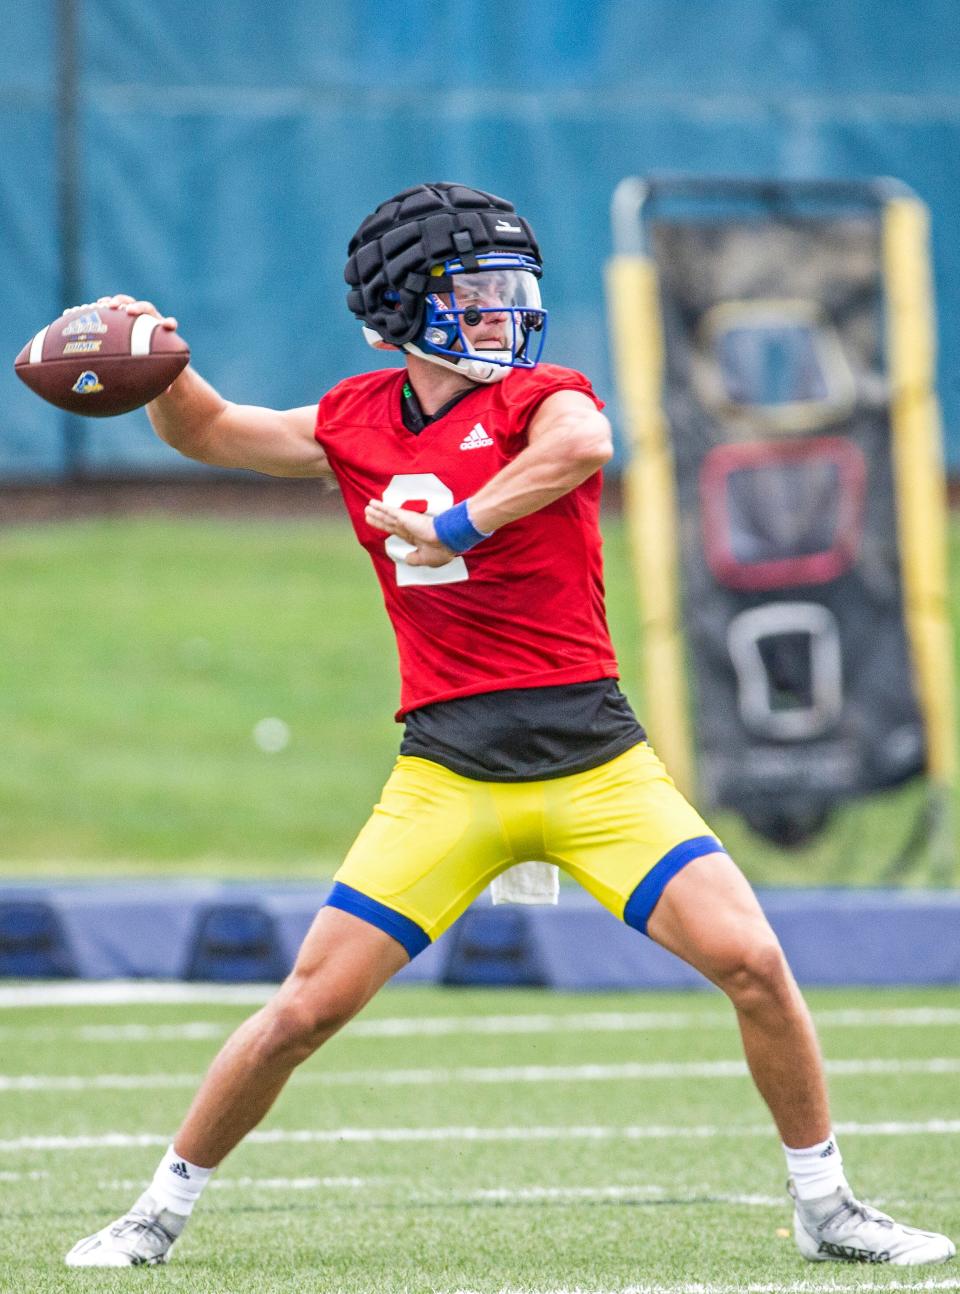 Delaware Blue Hens lead quarterback Nolan Henderson (2) throws a pass during the first preseason football practice at the University of Delaware football practice field on Friday, Aug. 5, 2022.